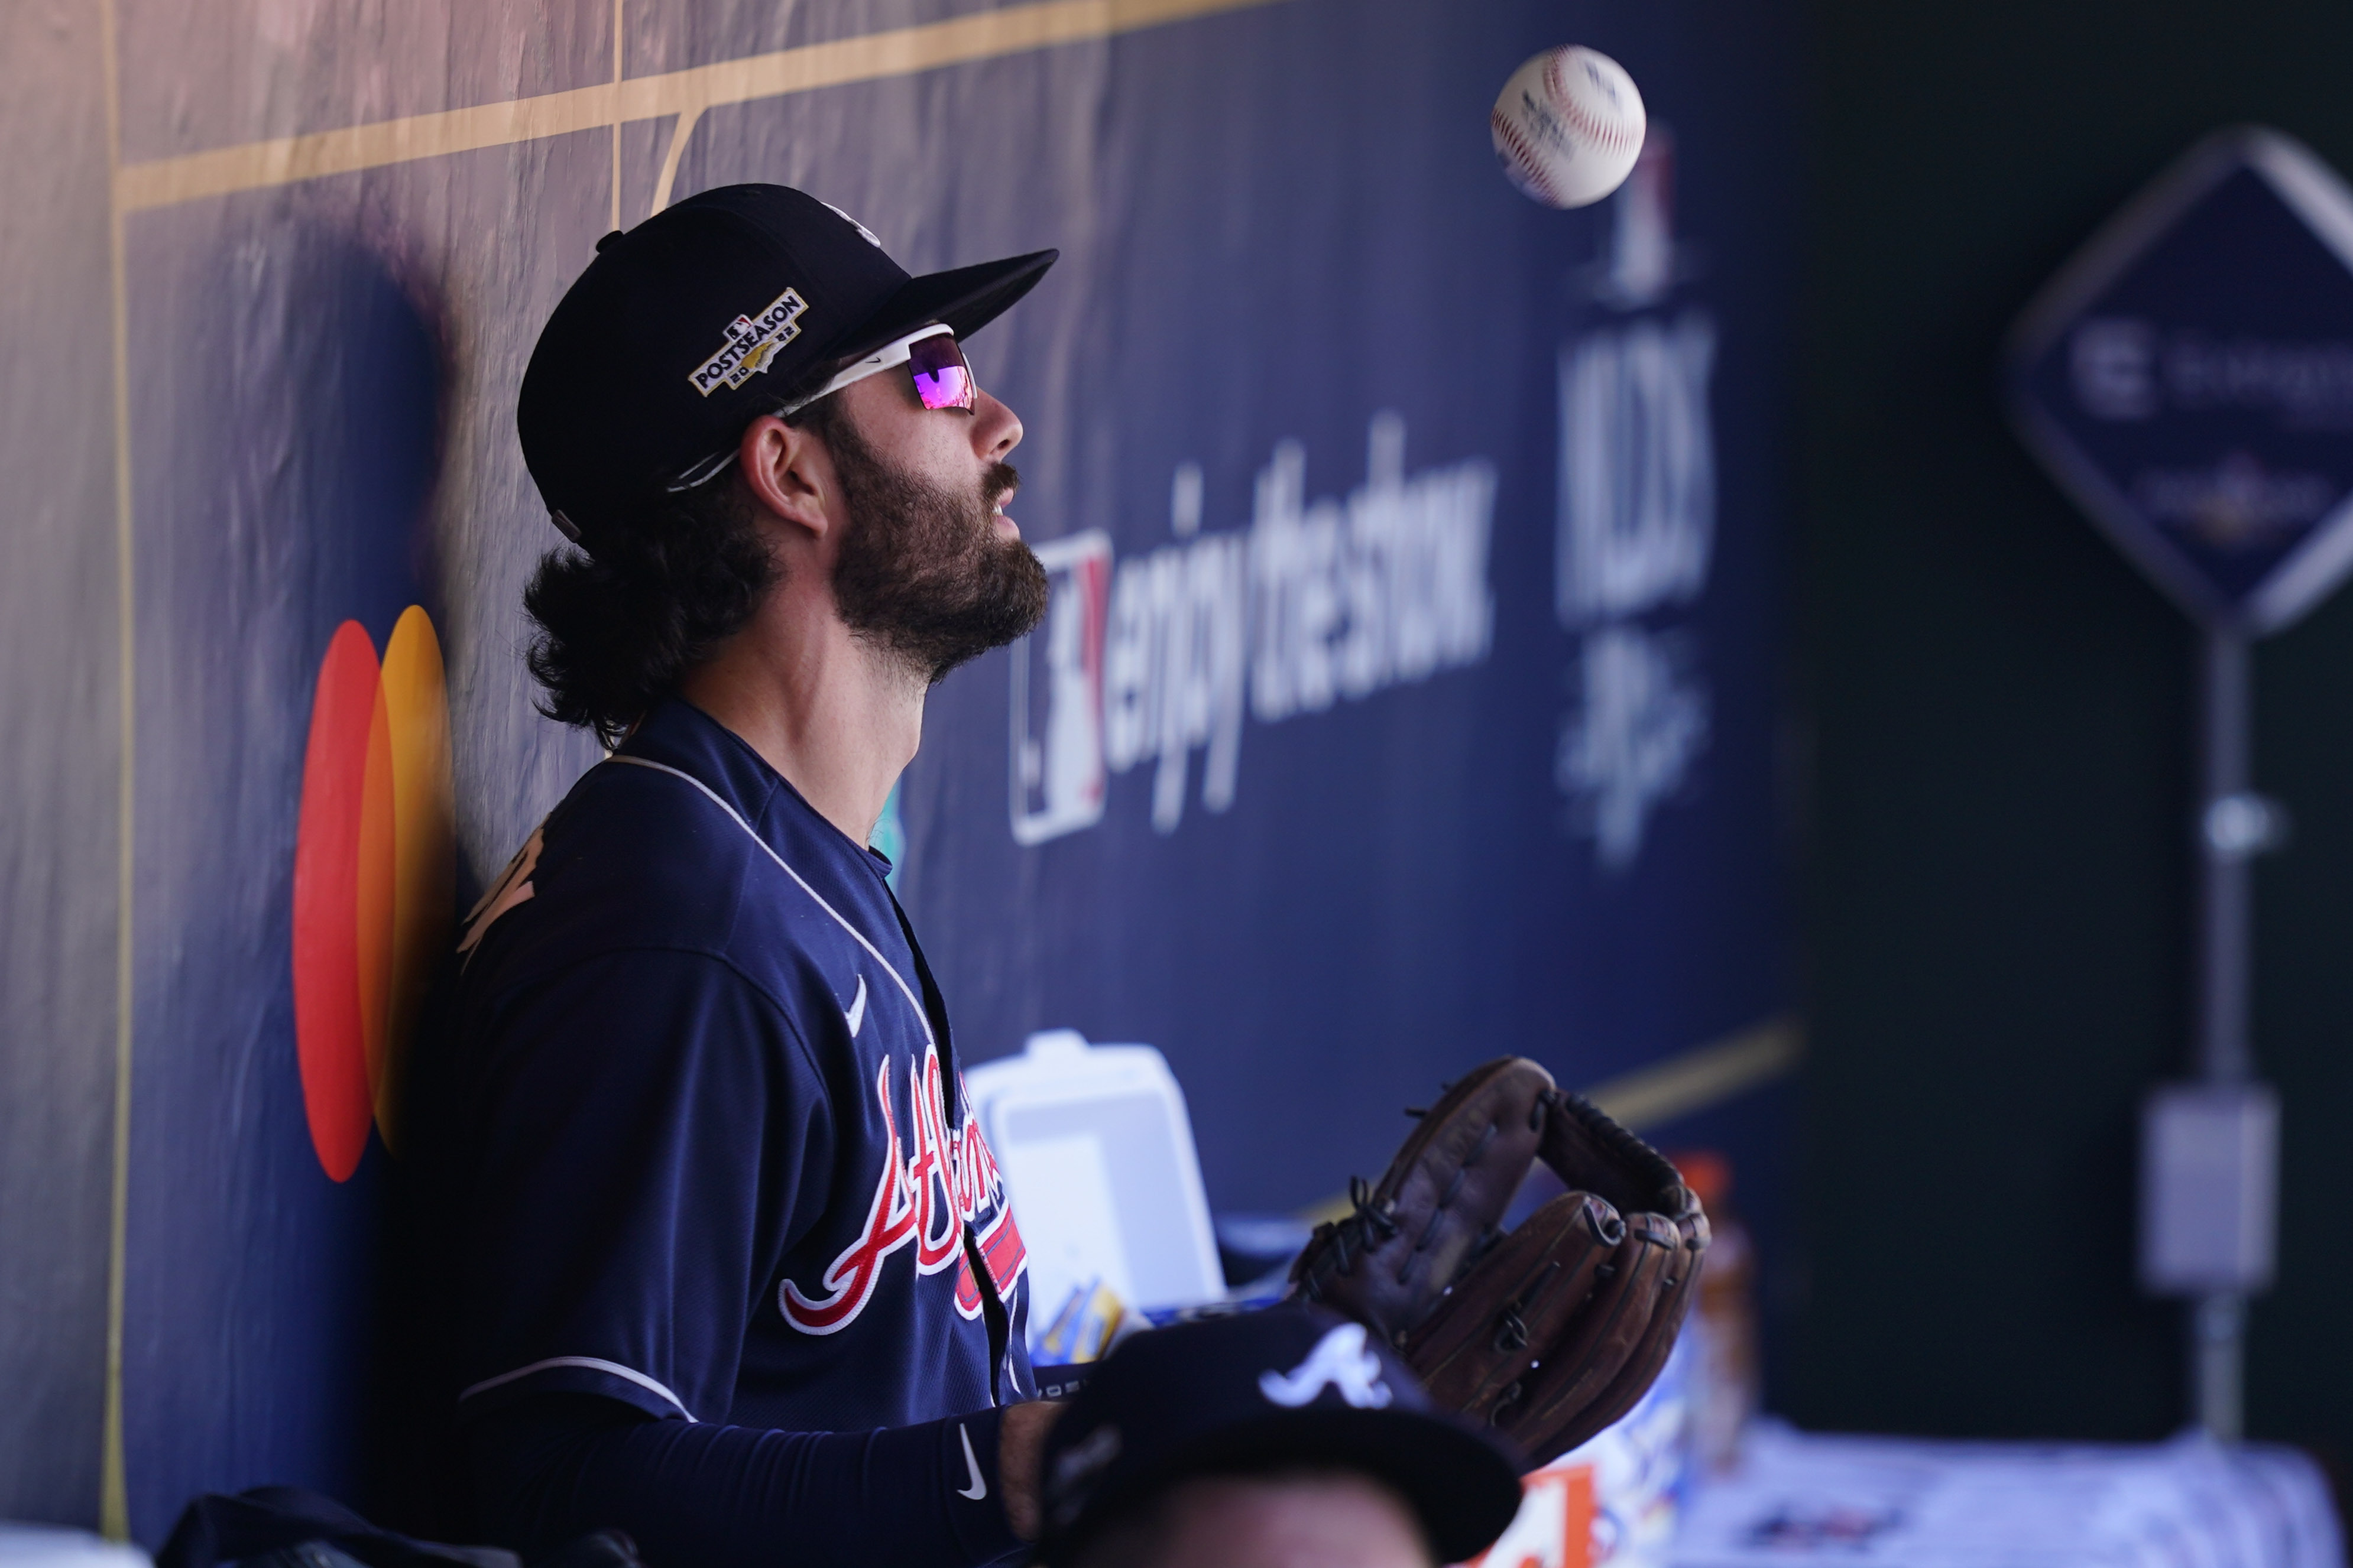 Dansby Swanson's Cubs career off to a rocky start